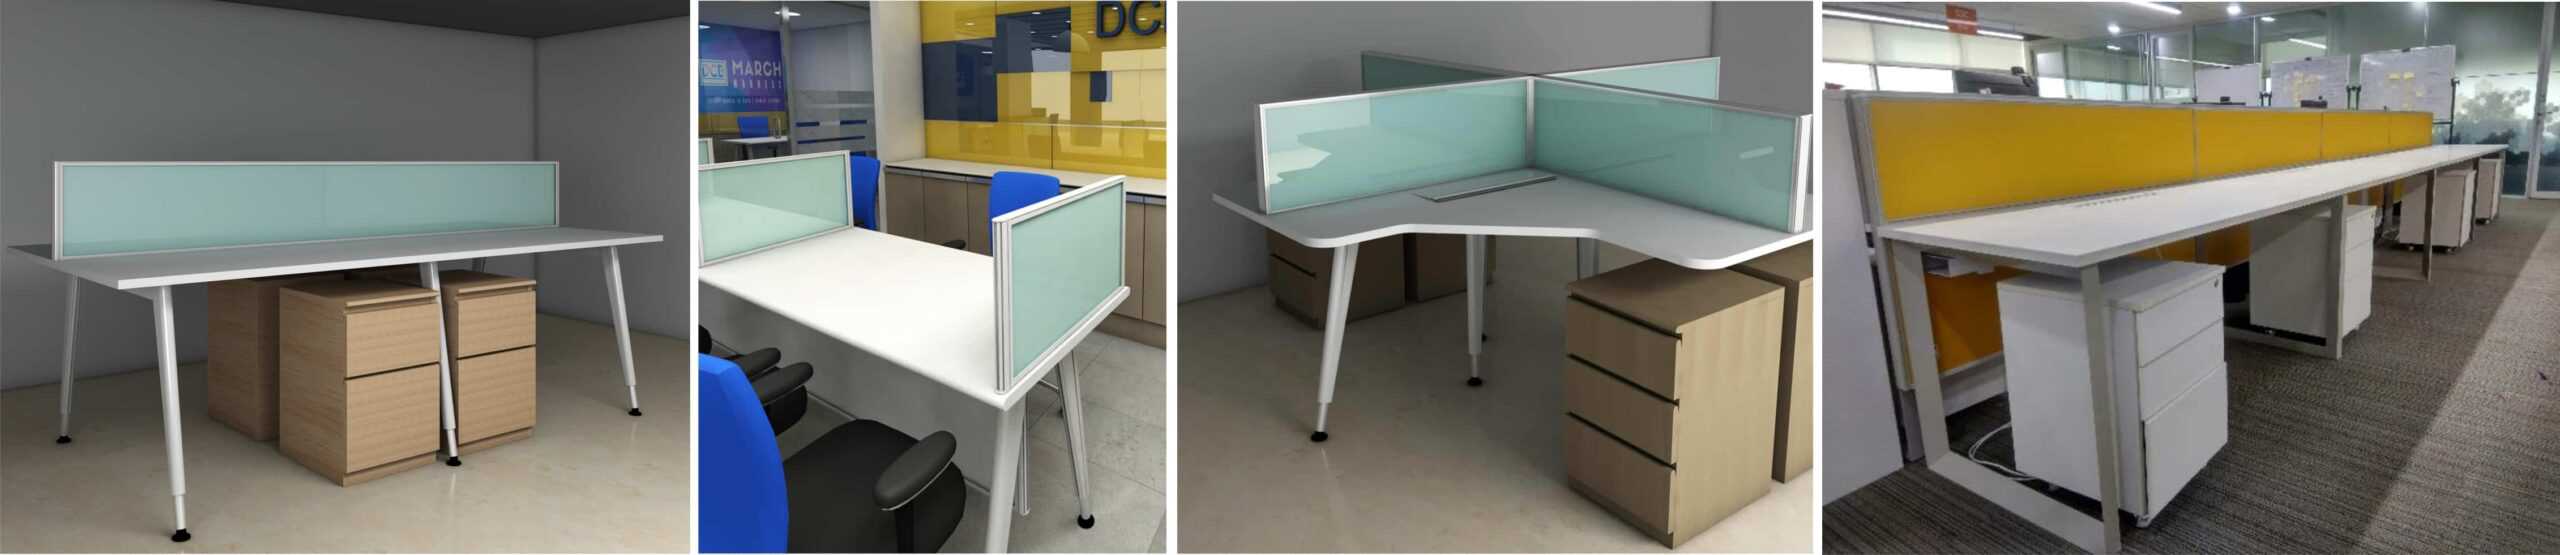 ws28 modular partition countertop and rear mounted for nonshared workstations